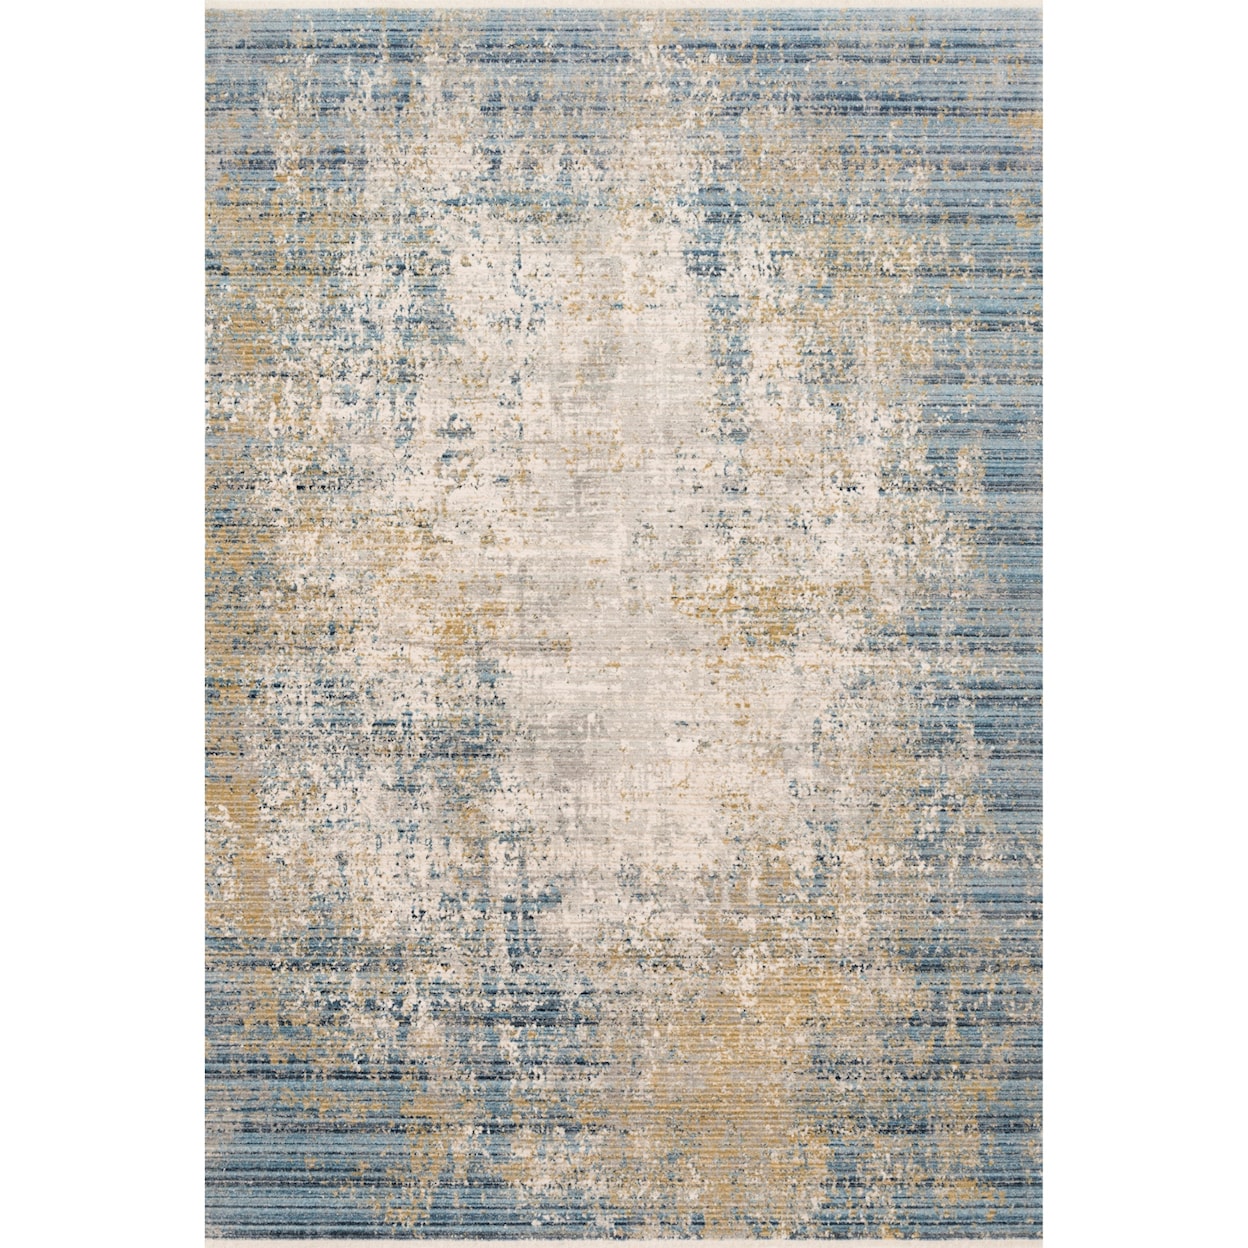 Reeds Rugs Claire 9'6" x 13' Neutral / Sea Rug